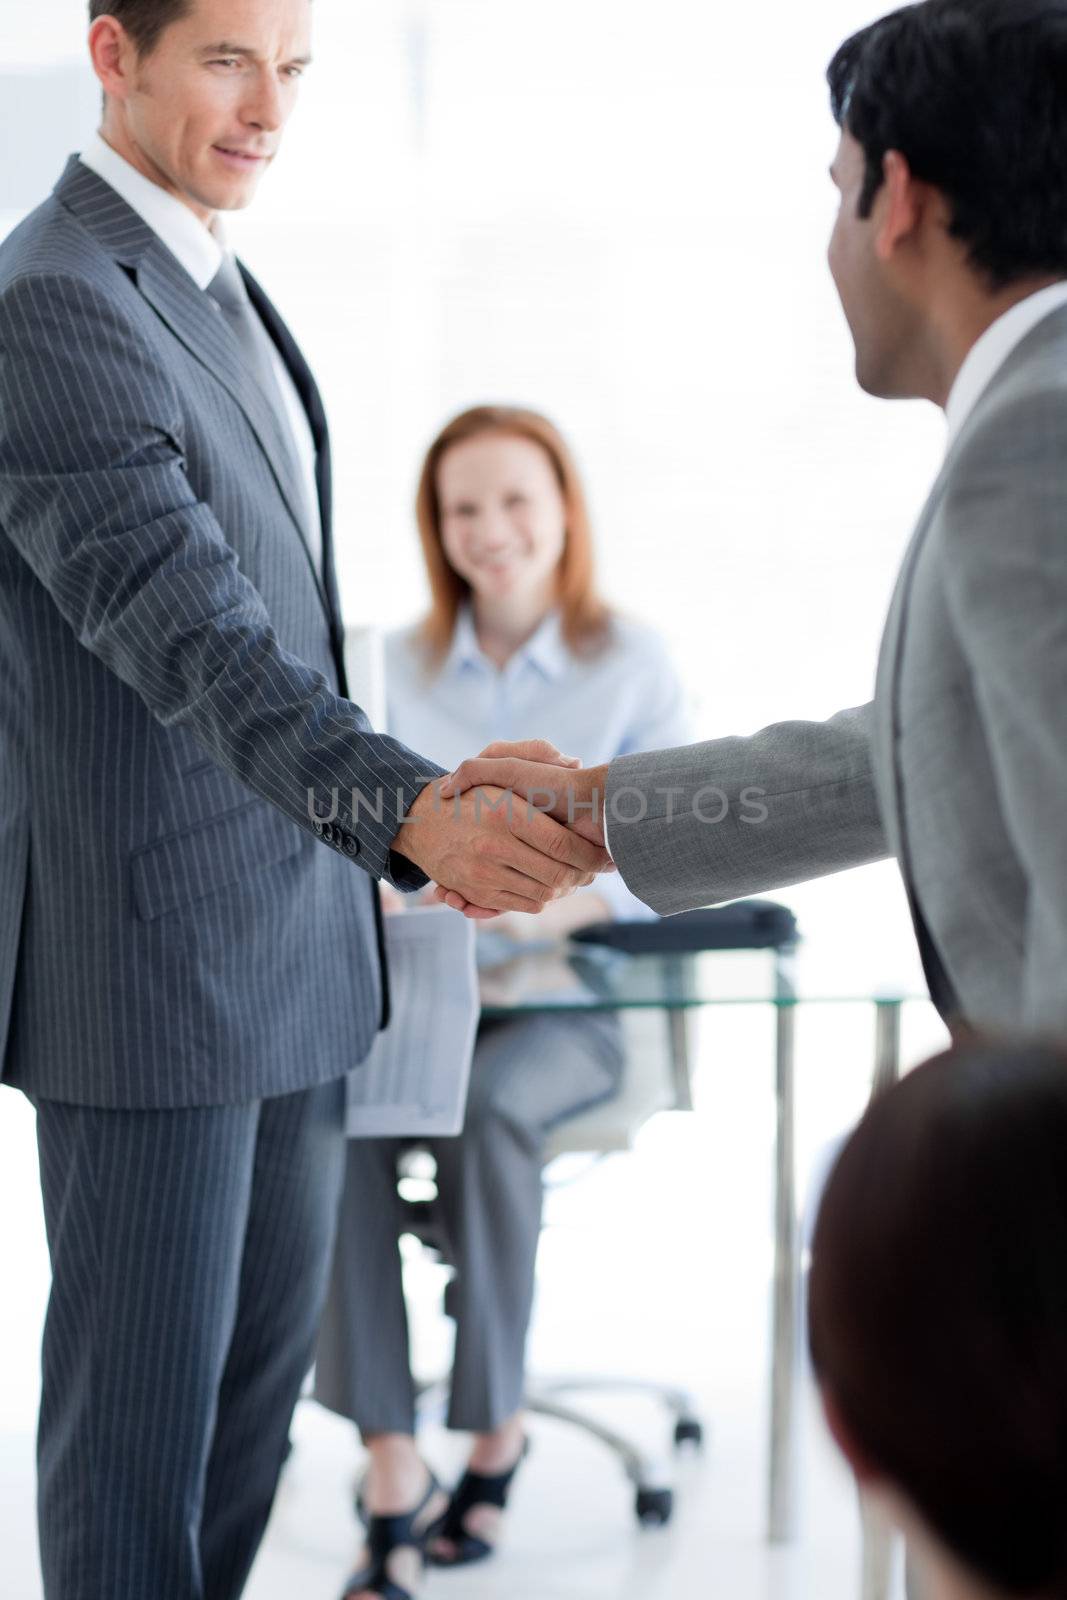 Businessmen greeting each other at a job interview by Wavebreakmedia